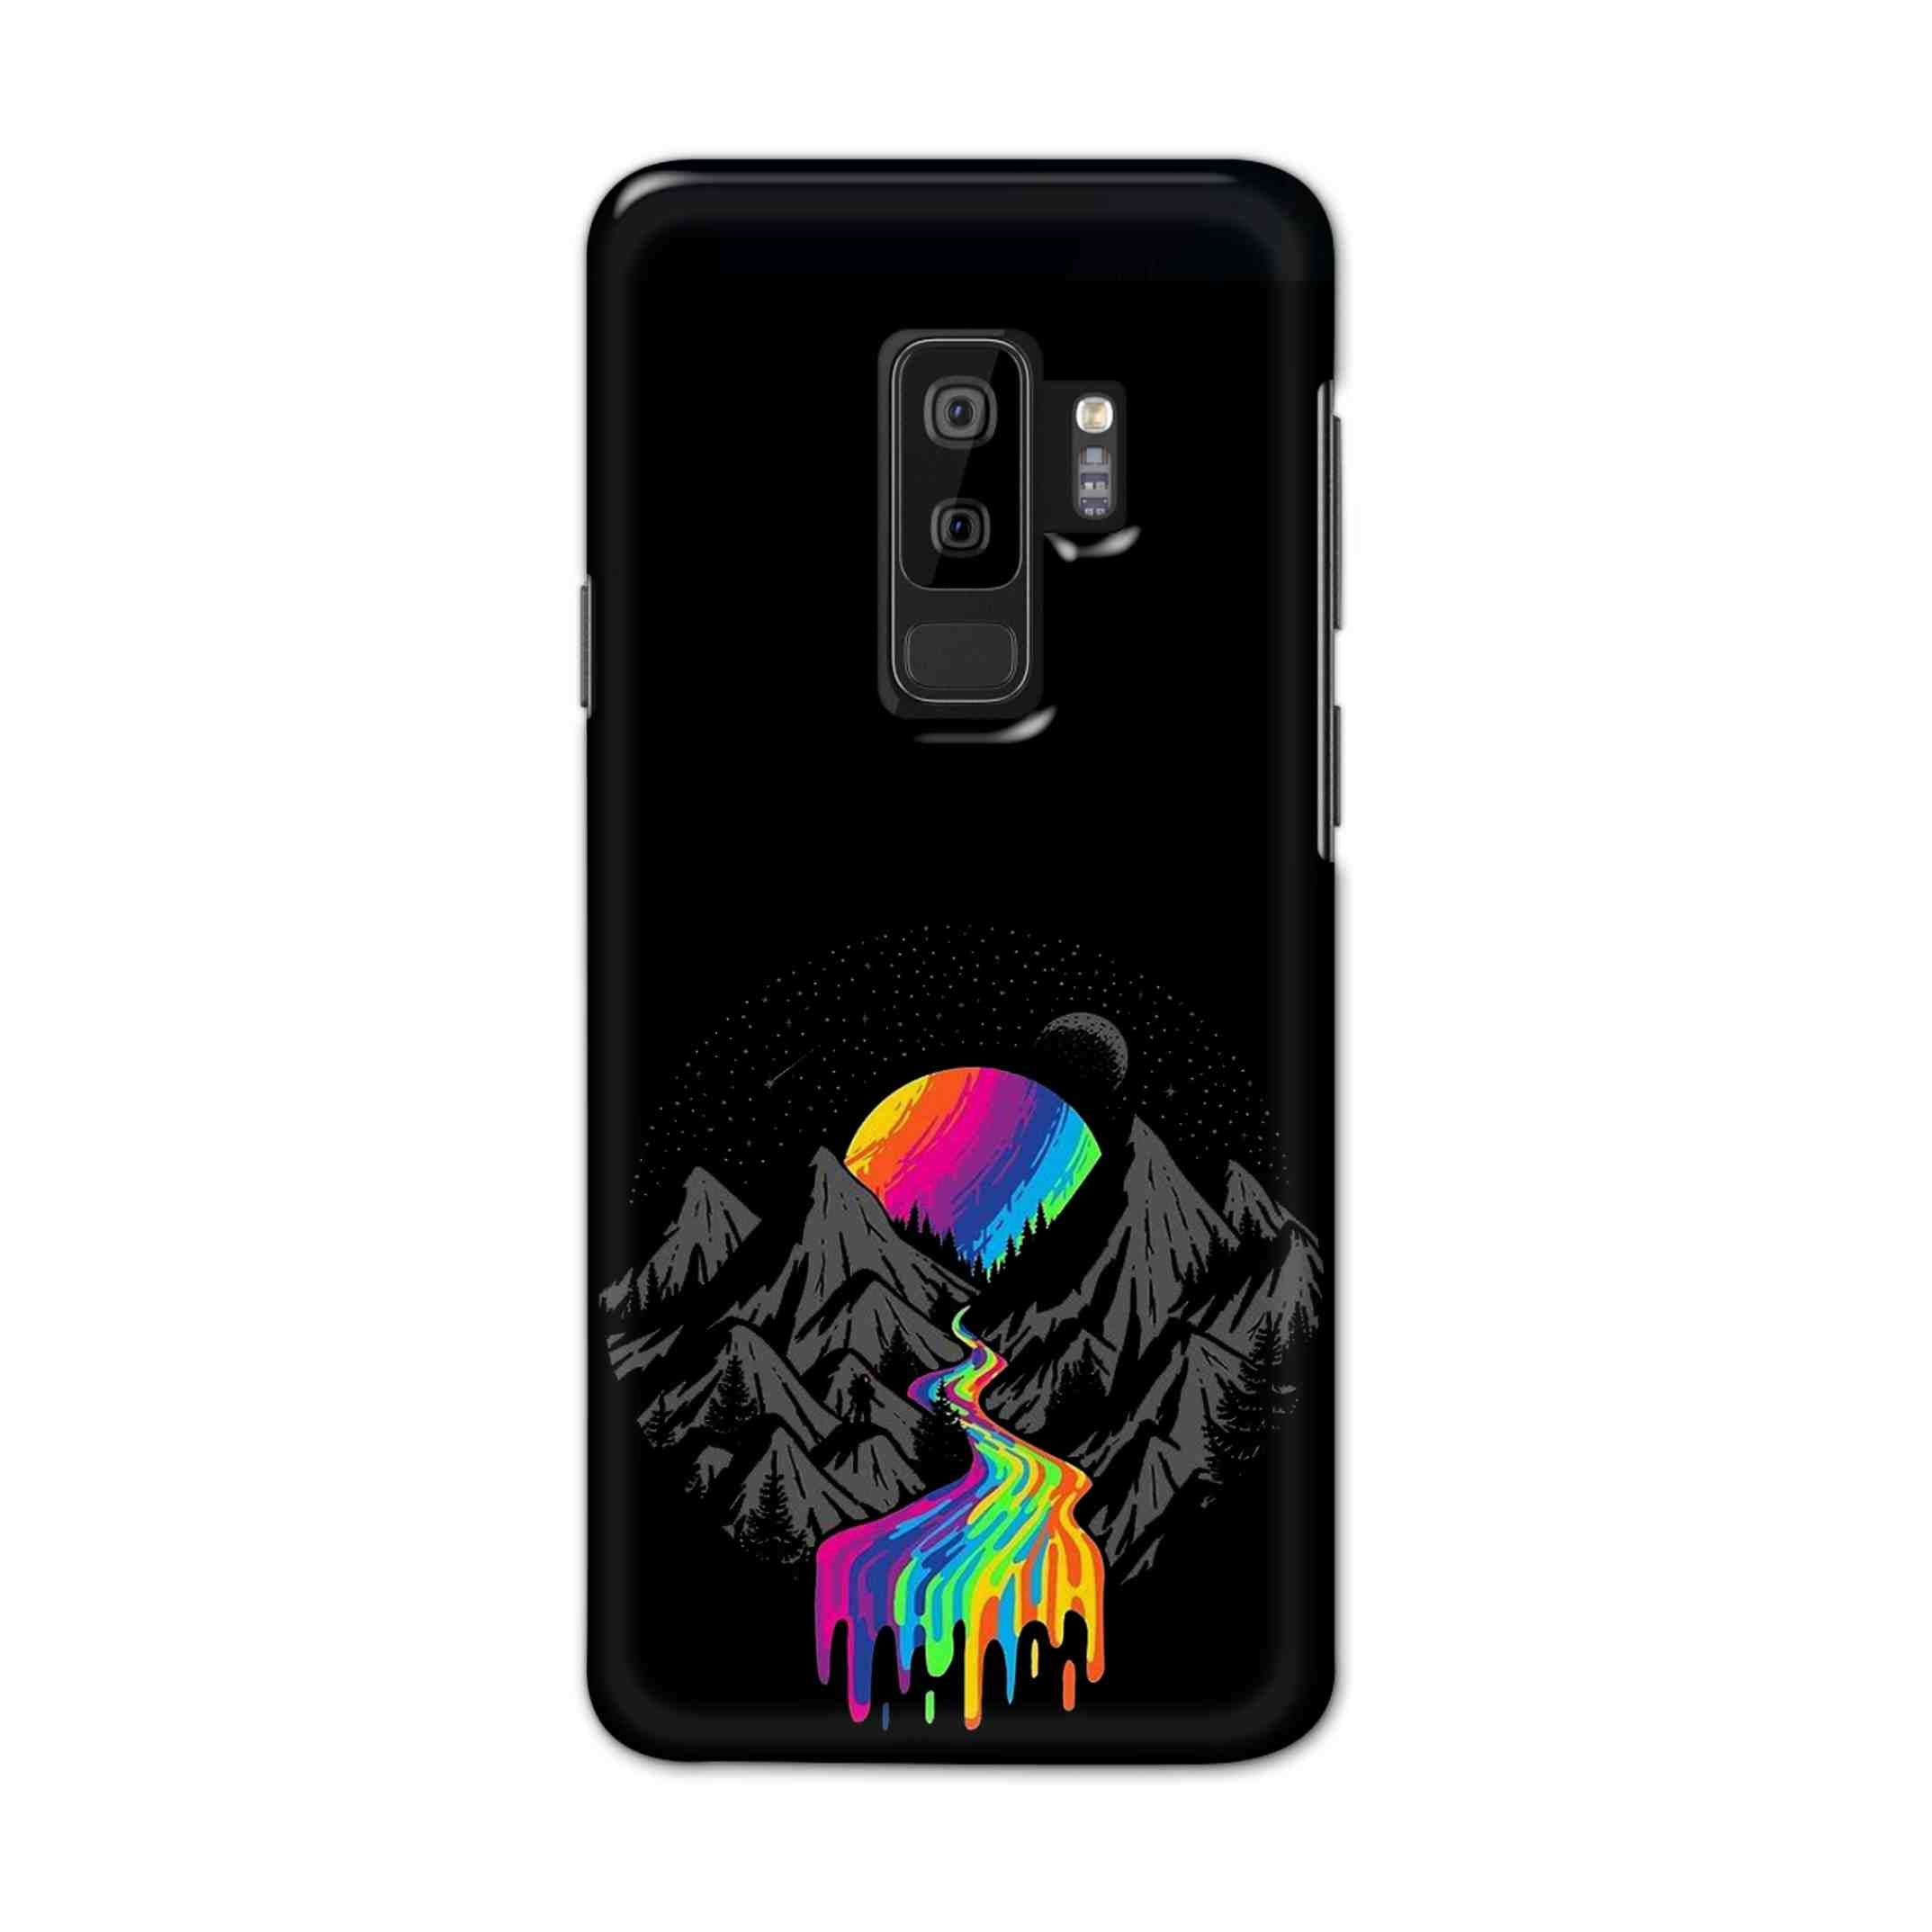 Buy Neon Mount Hard Back Mobile Phone Case Cover For Samsung S9 plus Online